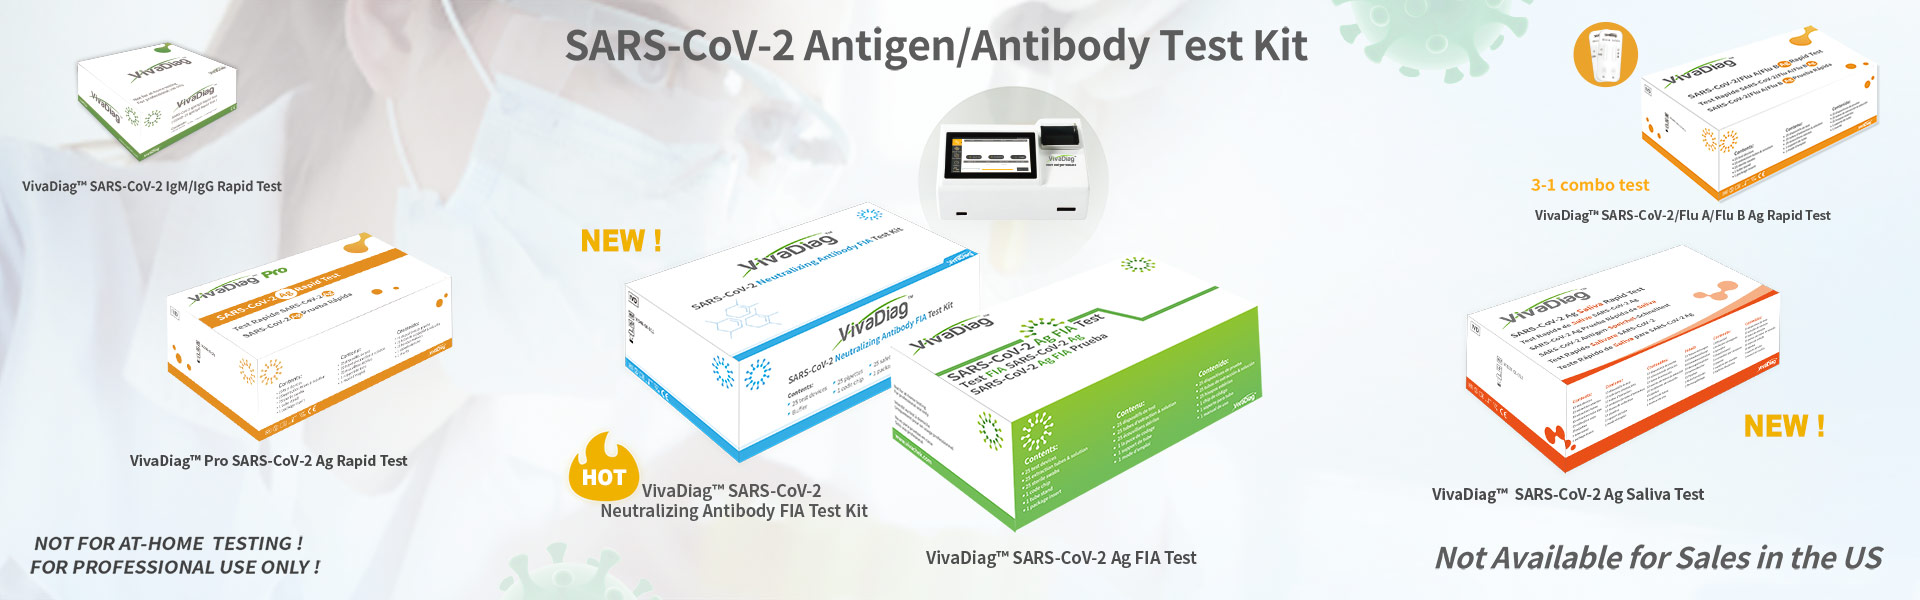 VivaDiag Antibody Test is a serology test to detect the IgM/IgG antibody in COVID-19 patients. It is CE marked and registered at Australia, Singapore and etc.